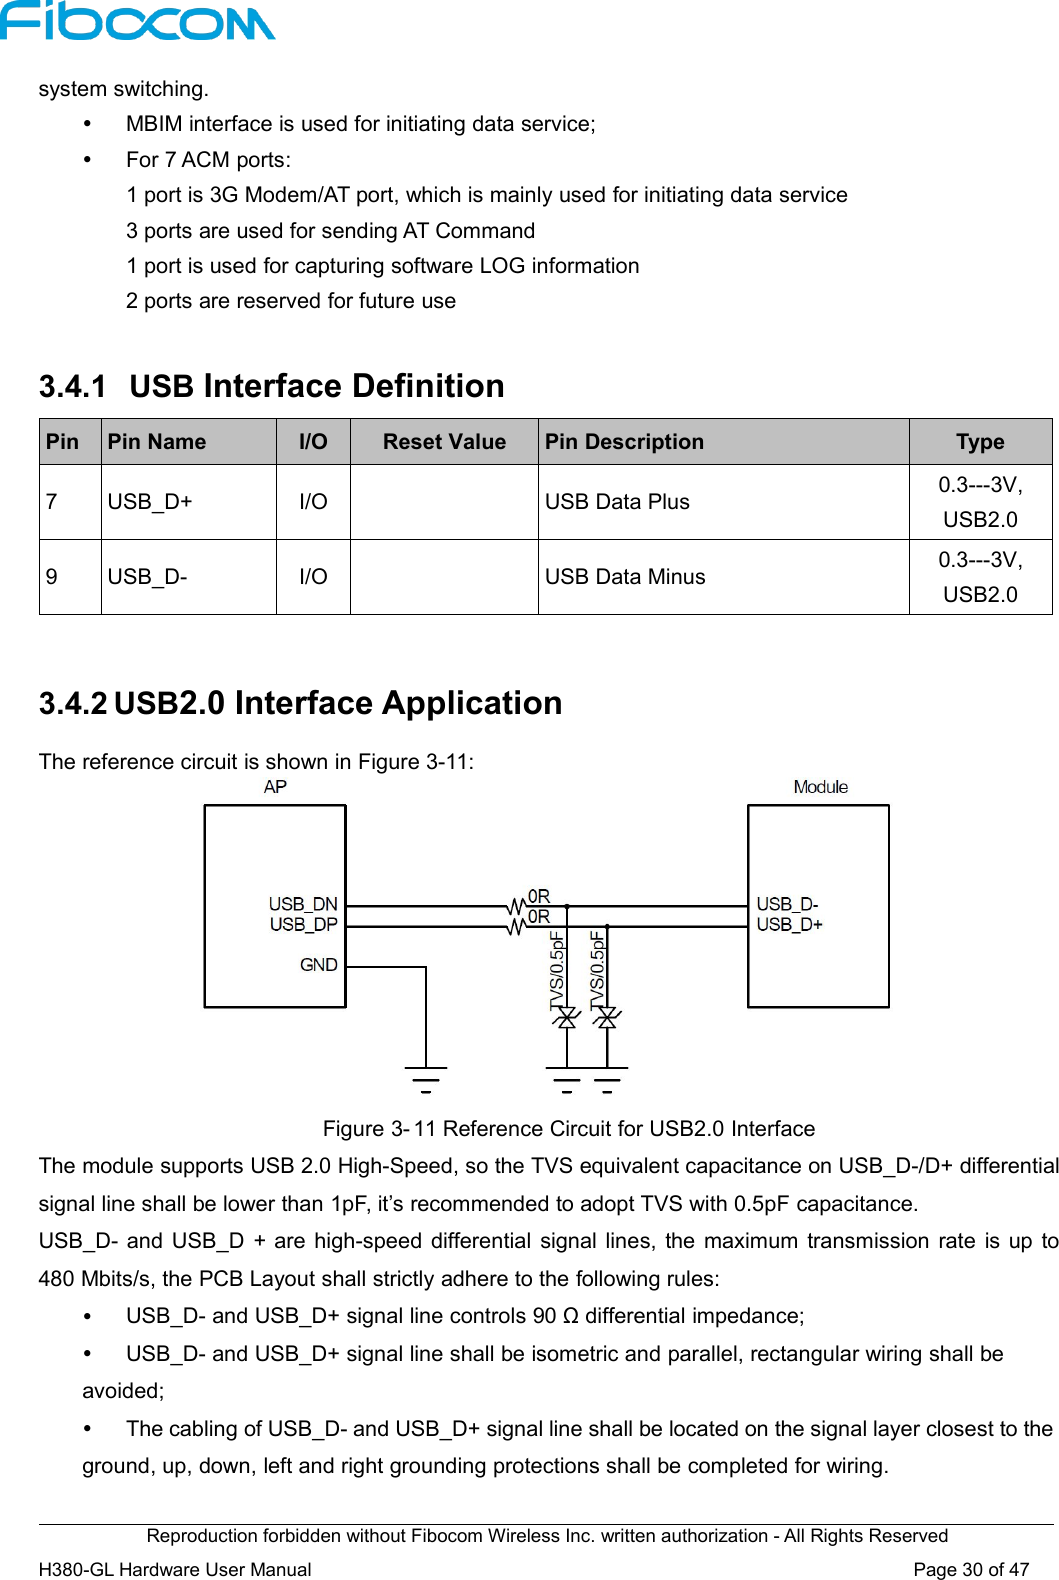 Reproduction forbidden without Fibocom Wireless Inc. written authorization - All Rights ReservedH380-GL Hardware User Manual Page30of47system switching.MBIM interface is used for initiating data service;For 7 ACM ports:1 port is 3G Modem/AT port, which is mainly used for initiating data service3 ports are used for sending AT Command1 port is used for capturing software LOG information2 ports are reserved for future use3.4.1 USB Interface DefinitionPinPin NameI/OReset ValuePin DescriptionType7USB_D+I/OUSB Data Plus0.3---3V,USB2.09USB_D-I/OUSB Data Minus0.3---3V,USB2.03.4.2 USB2.0 Interface ApplicationThe reference circuit is shown in Figure 3-11:Figure 3- 11 Reference Circuit for USB2.0 InterfaceThe module supports USB 2.0 High-Speed, so the TVS equivalent capacitance on USB_D-/D+ differentialsignal line shall be lower than 1pF, it’s recommended to adopt TVS with 0.5pF capacitance.USB_D- and USB_D + are high-speed differential signal lines, the maximum transmission rate is up to480 Mbits/s, the PCB Layout shall strictly adhere to the following rules:USB_D- and USB_D+ signal line controls 90 Ω differential impedance;USB_D- and USB_D+ signal line shall be isometric and parallel, rectangular wiring shall beavoided;The cabling of USB_D- and USB_D+ signal line shall be located on the signal layer closest to theground, up, down, left and right grounding protections shall be completed for wiring.